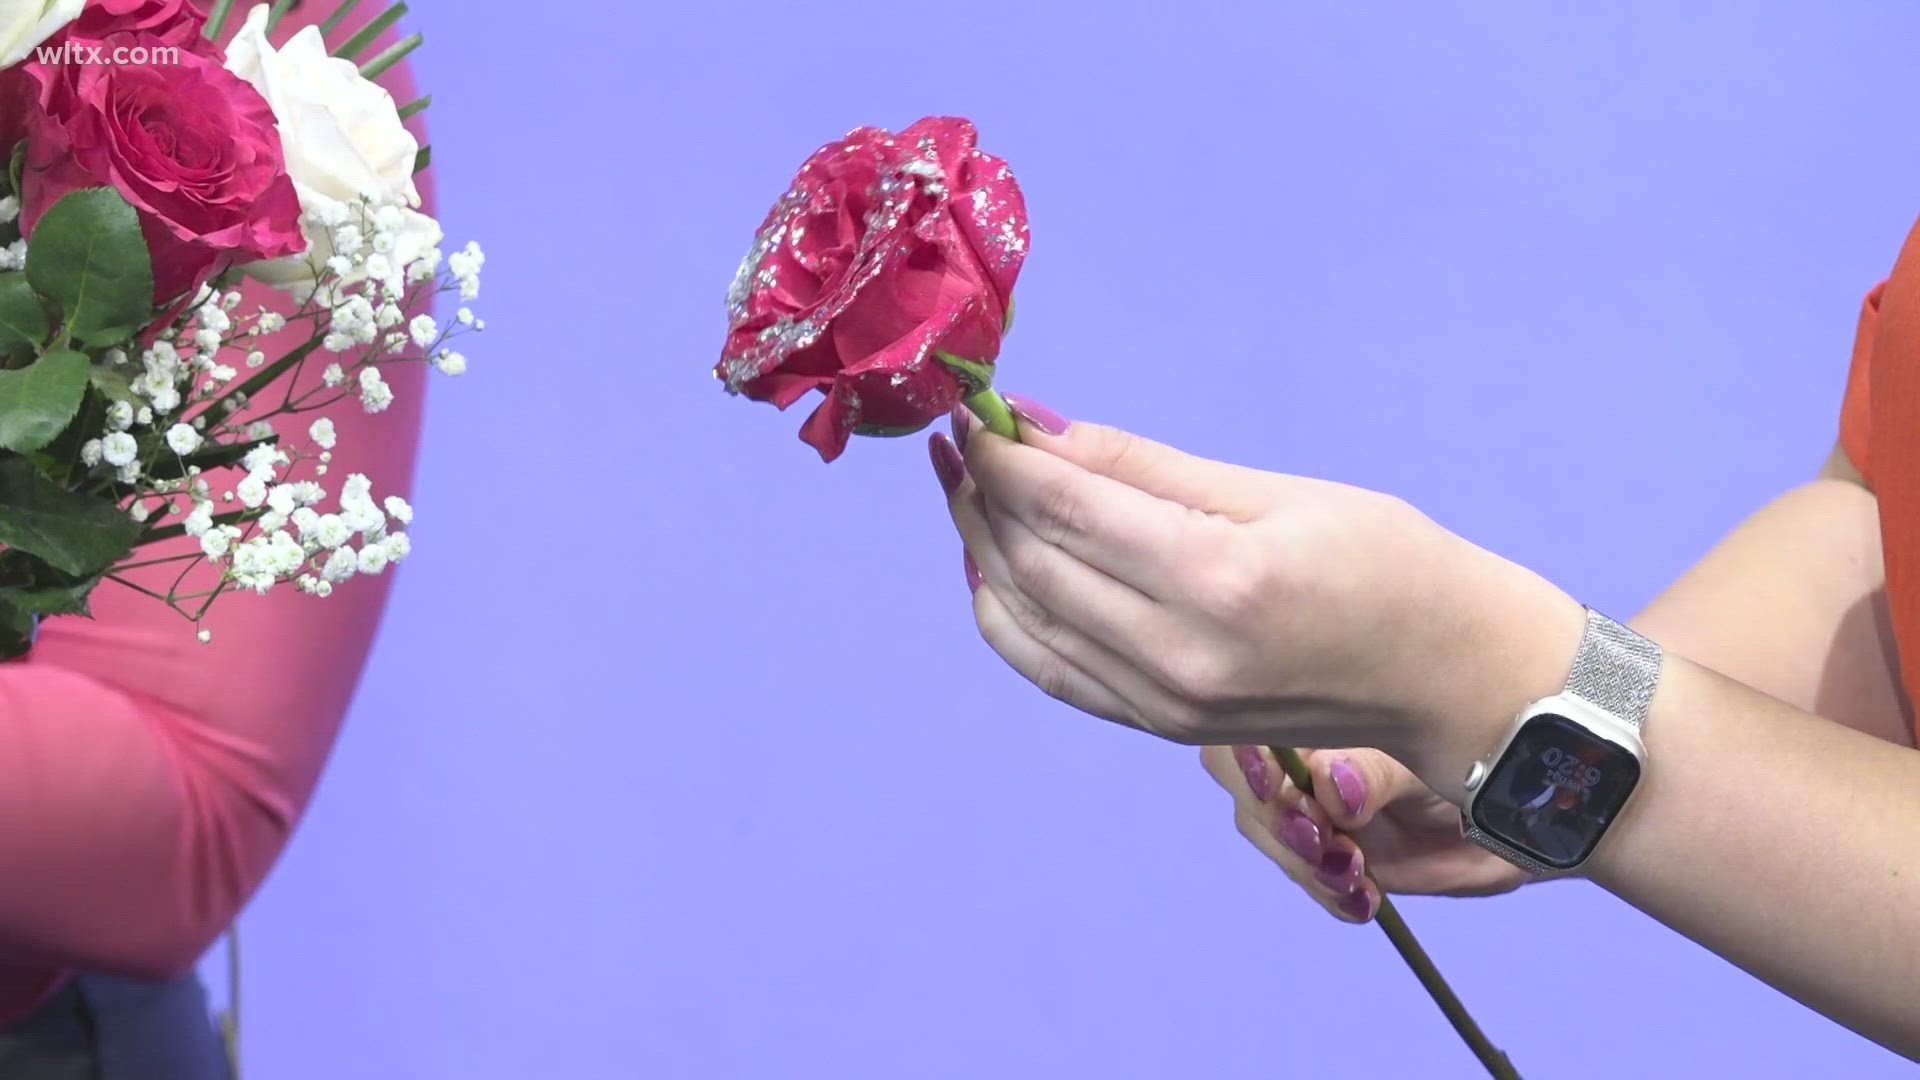 We're showing you how to make the viral glitter roses for Valentine's Day